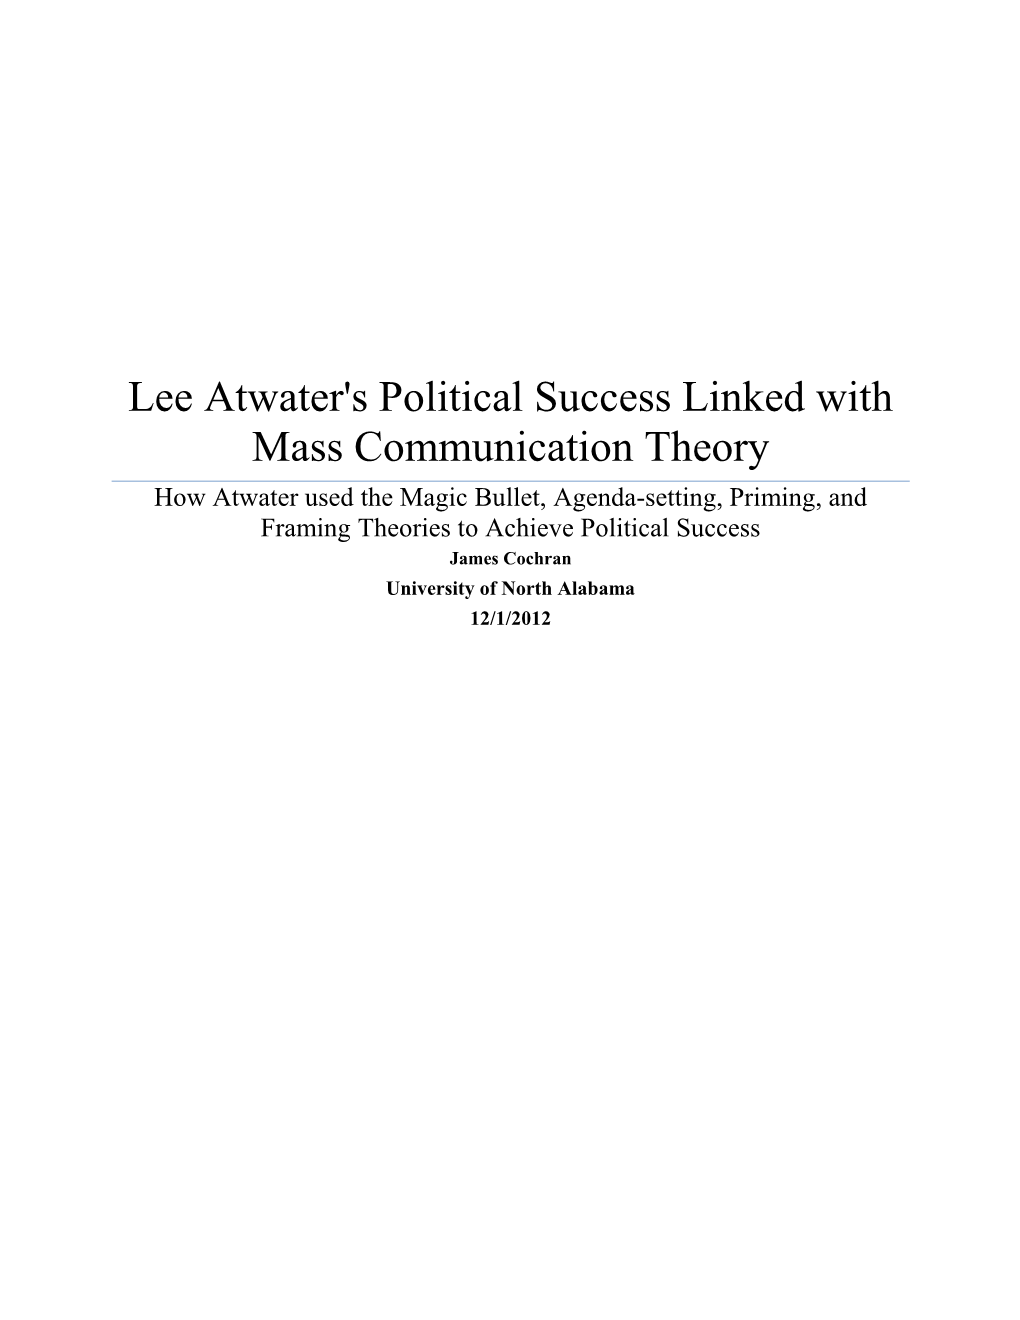 Lee Atwater's Political Success Linked with Mass Communication Theory